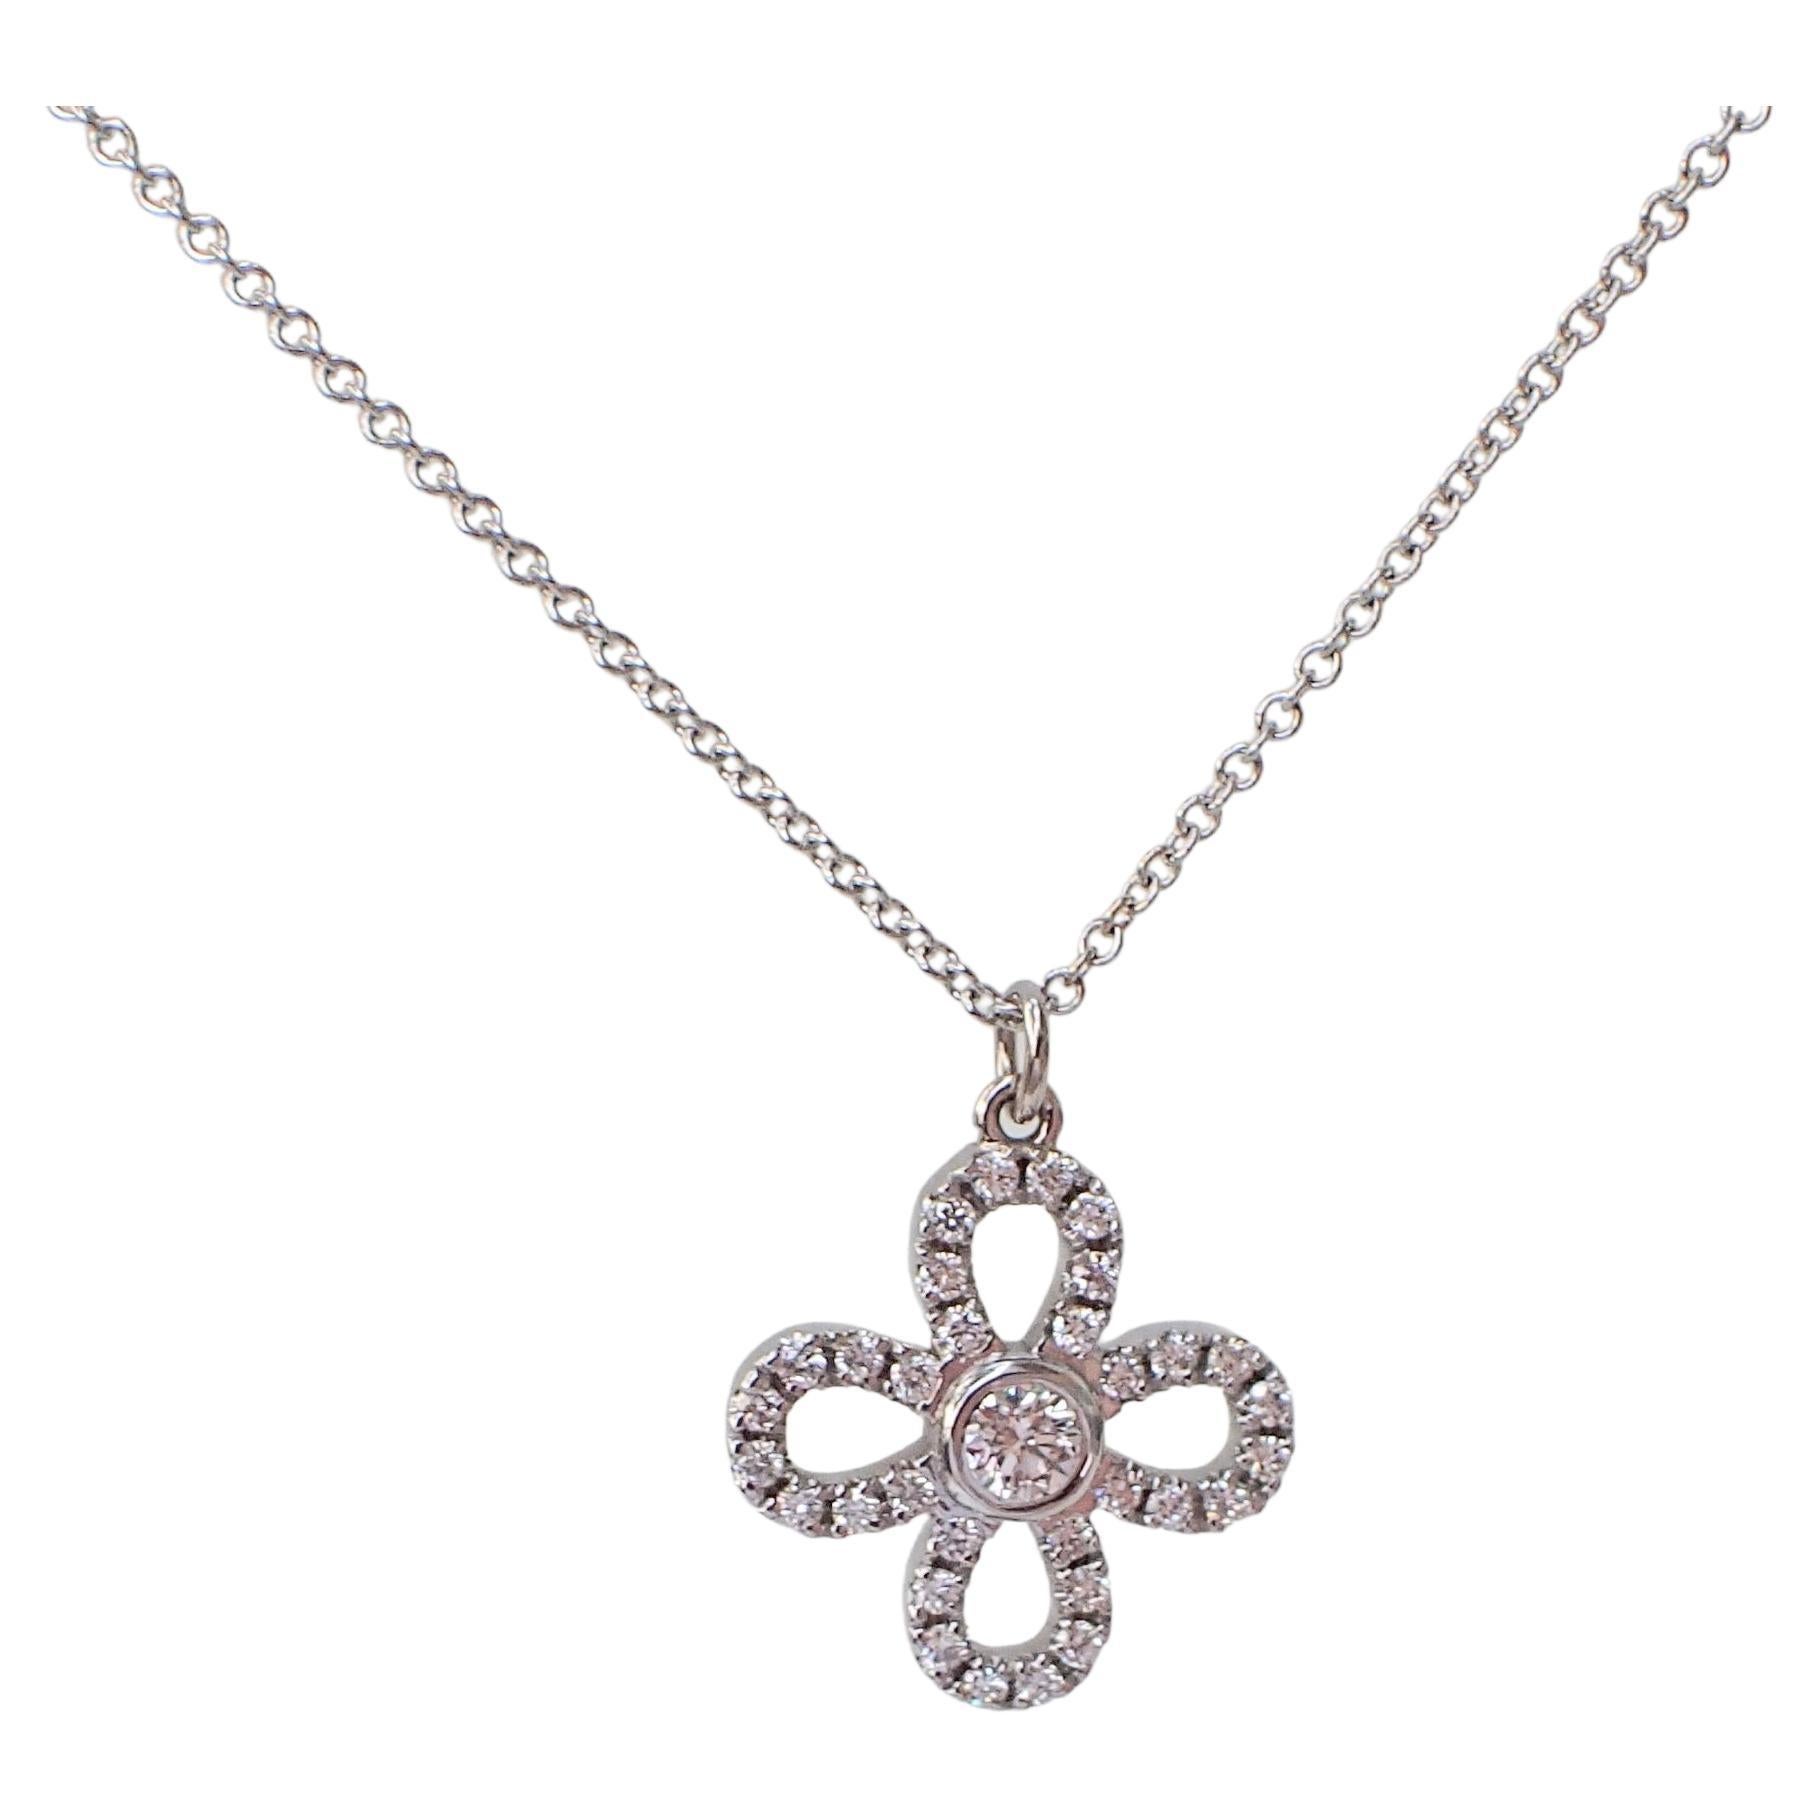 18k White Gold Pendant with 0.46 Carats of Diamond Hangs from Cable Chain